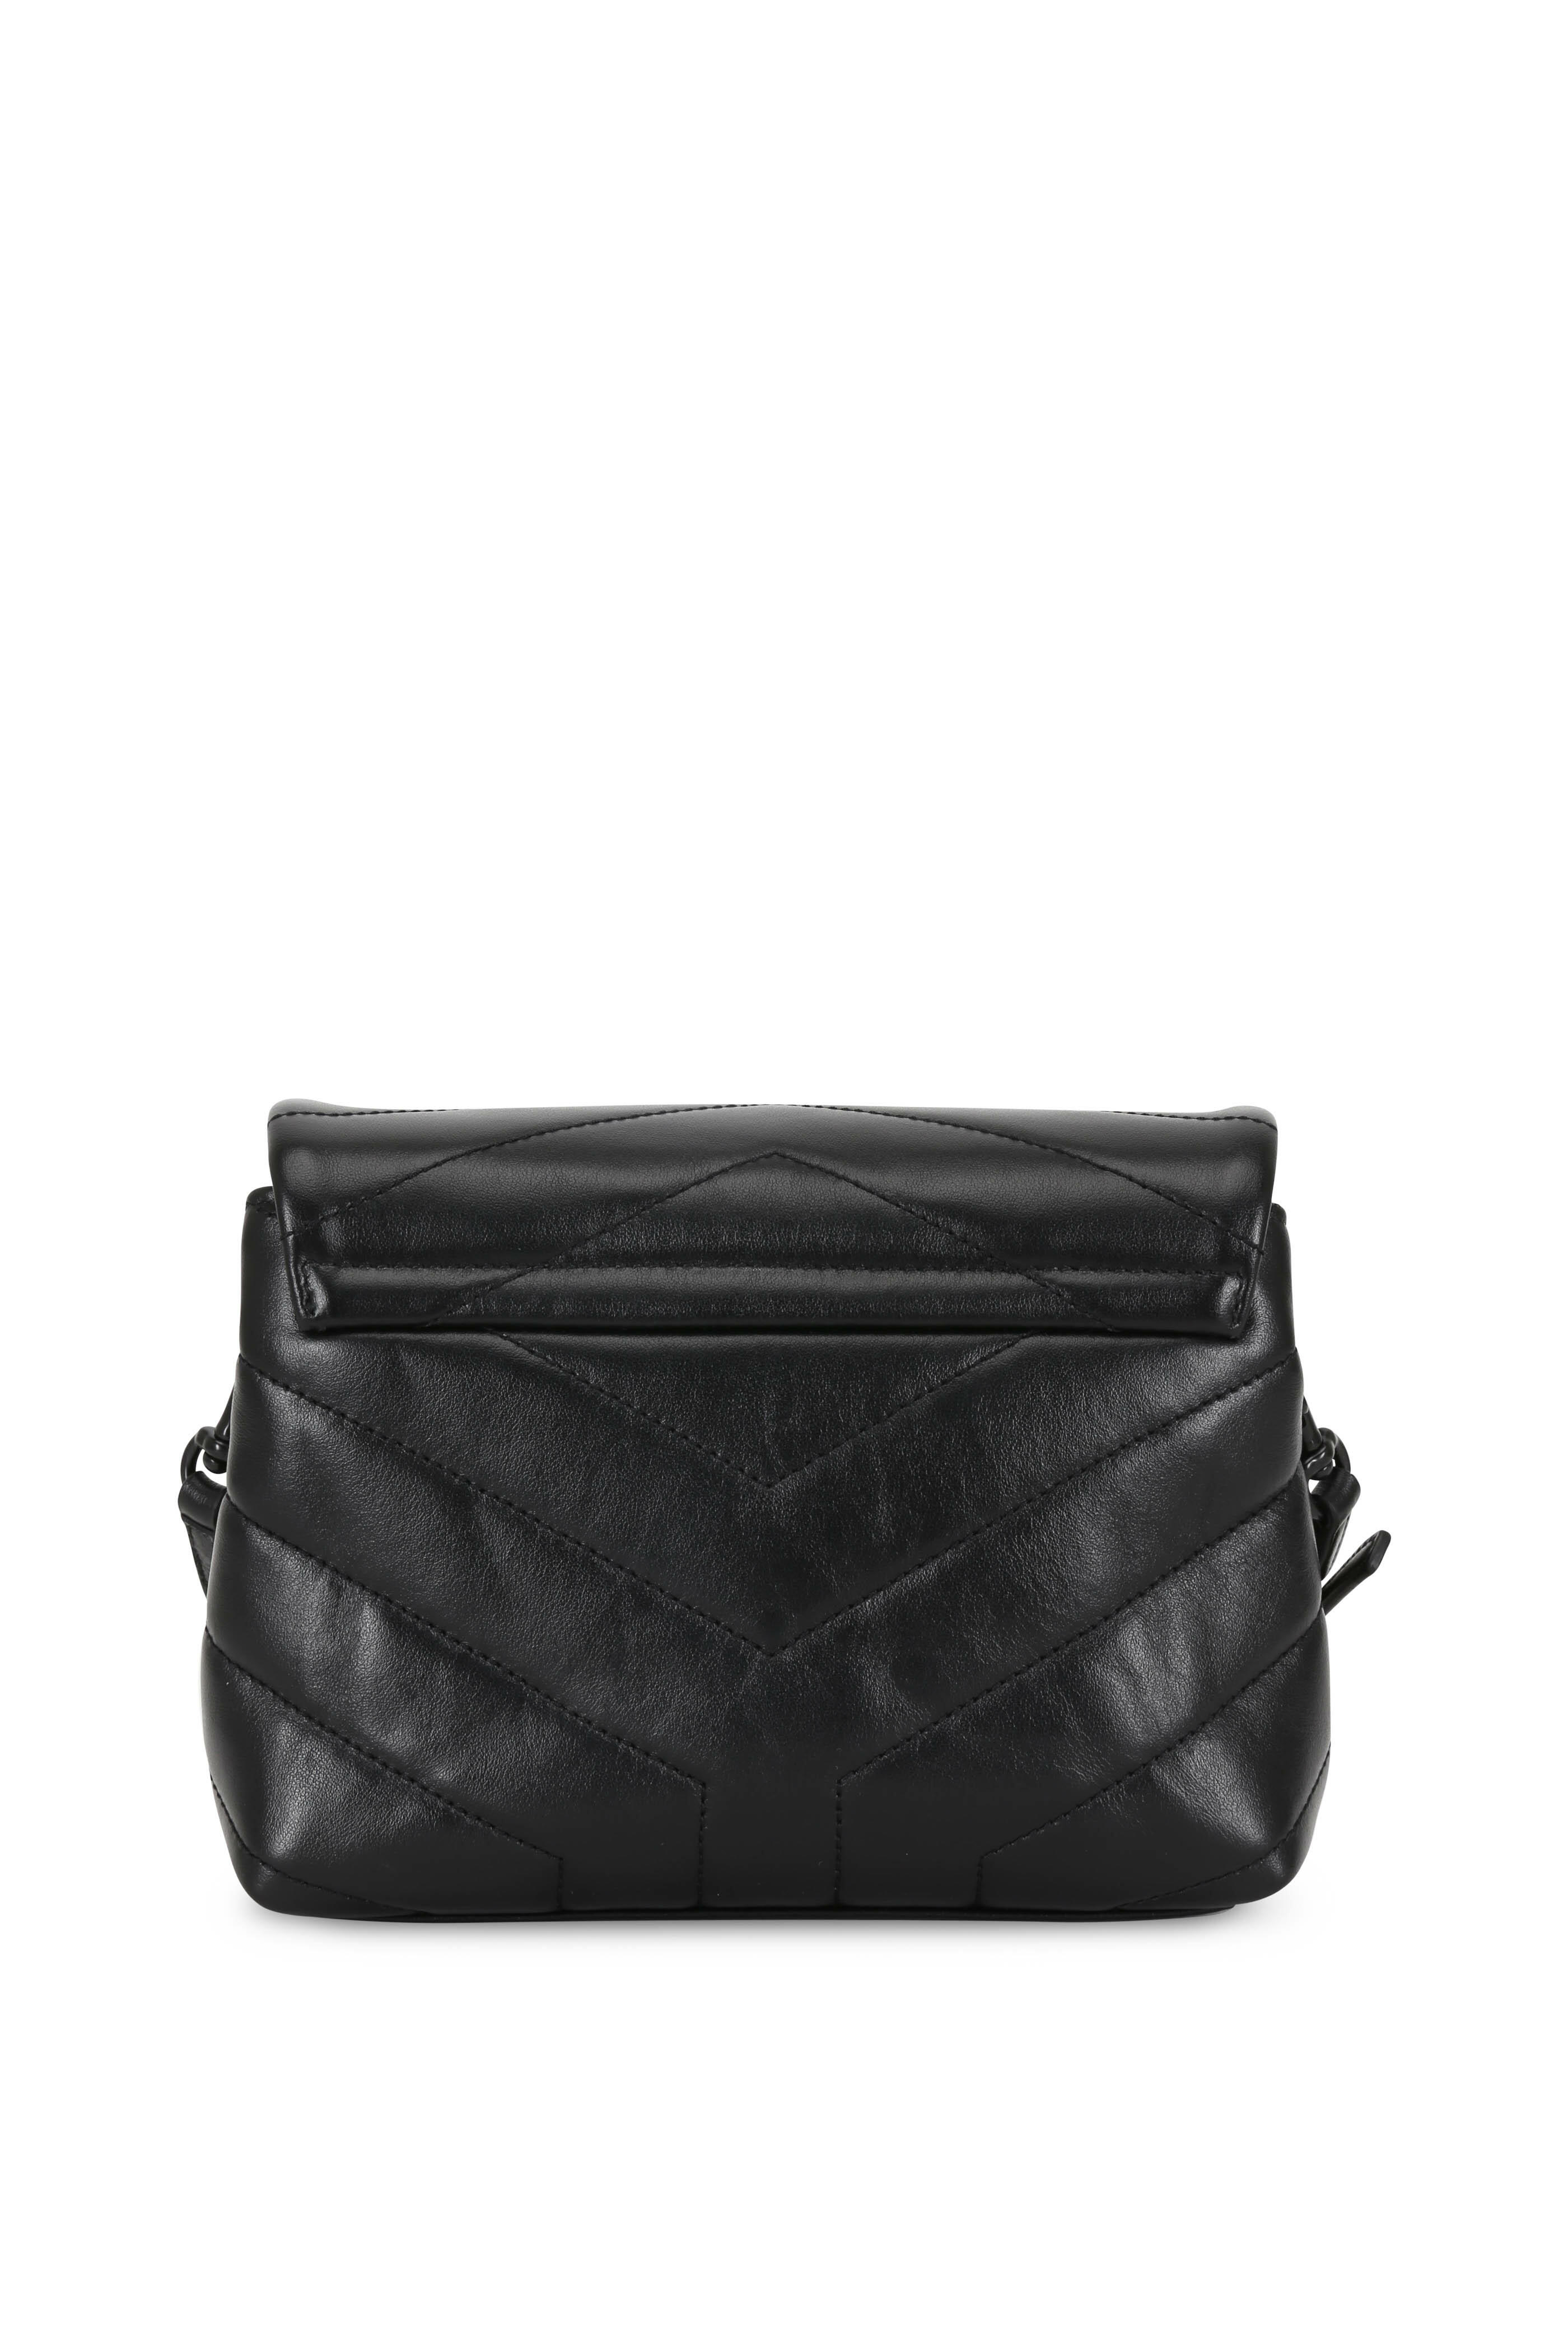 Saint Laurent - Loulou Toy Black Quilted Leather Mini Bag